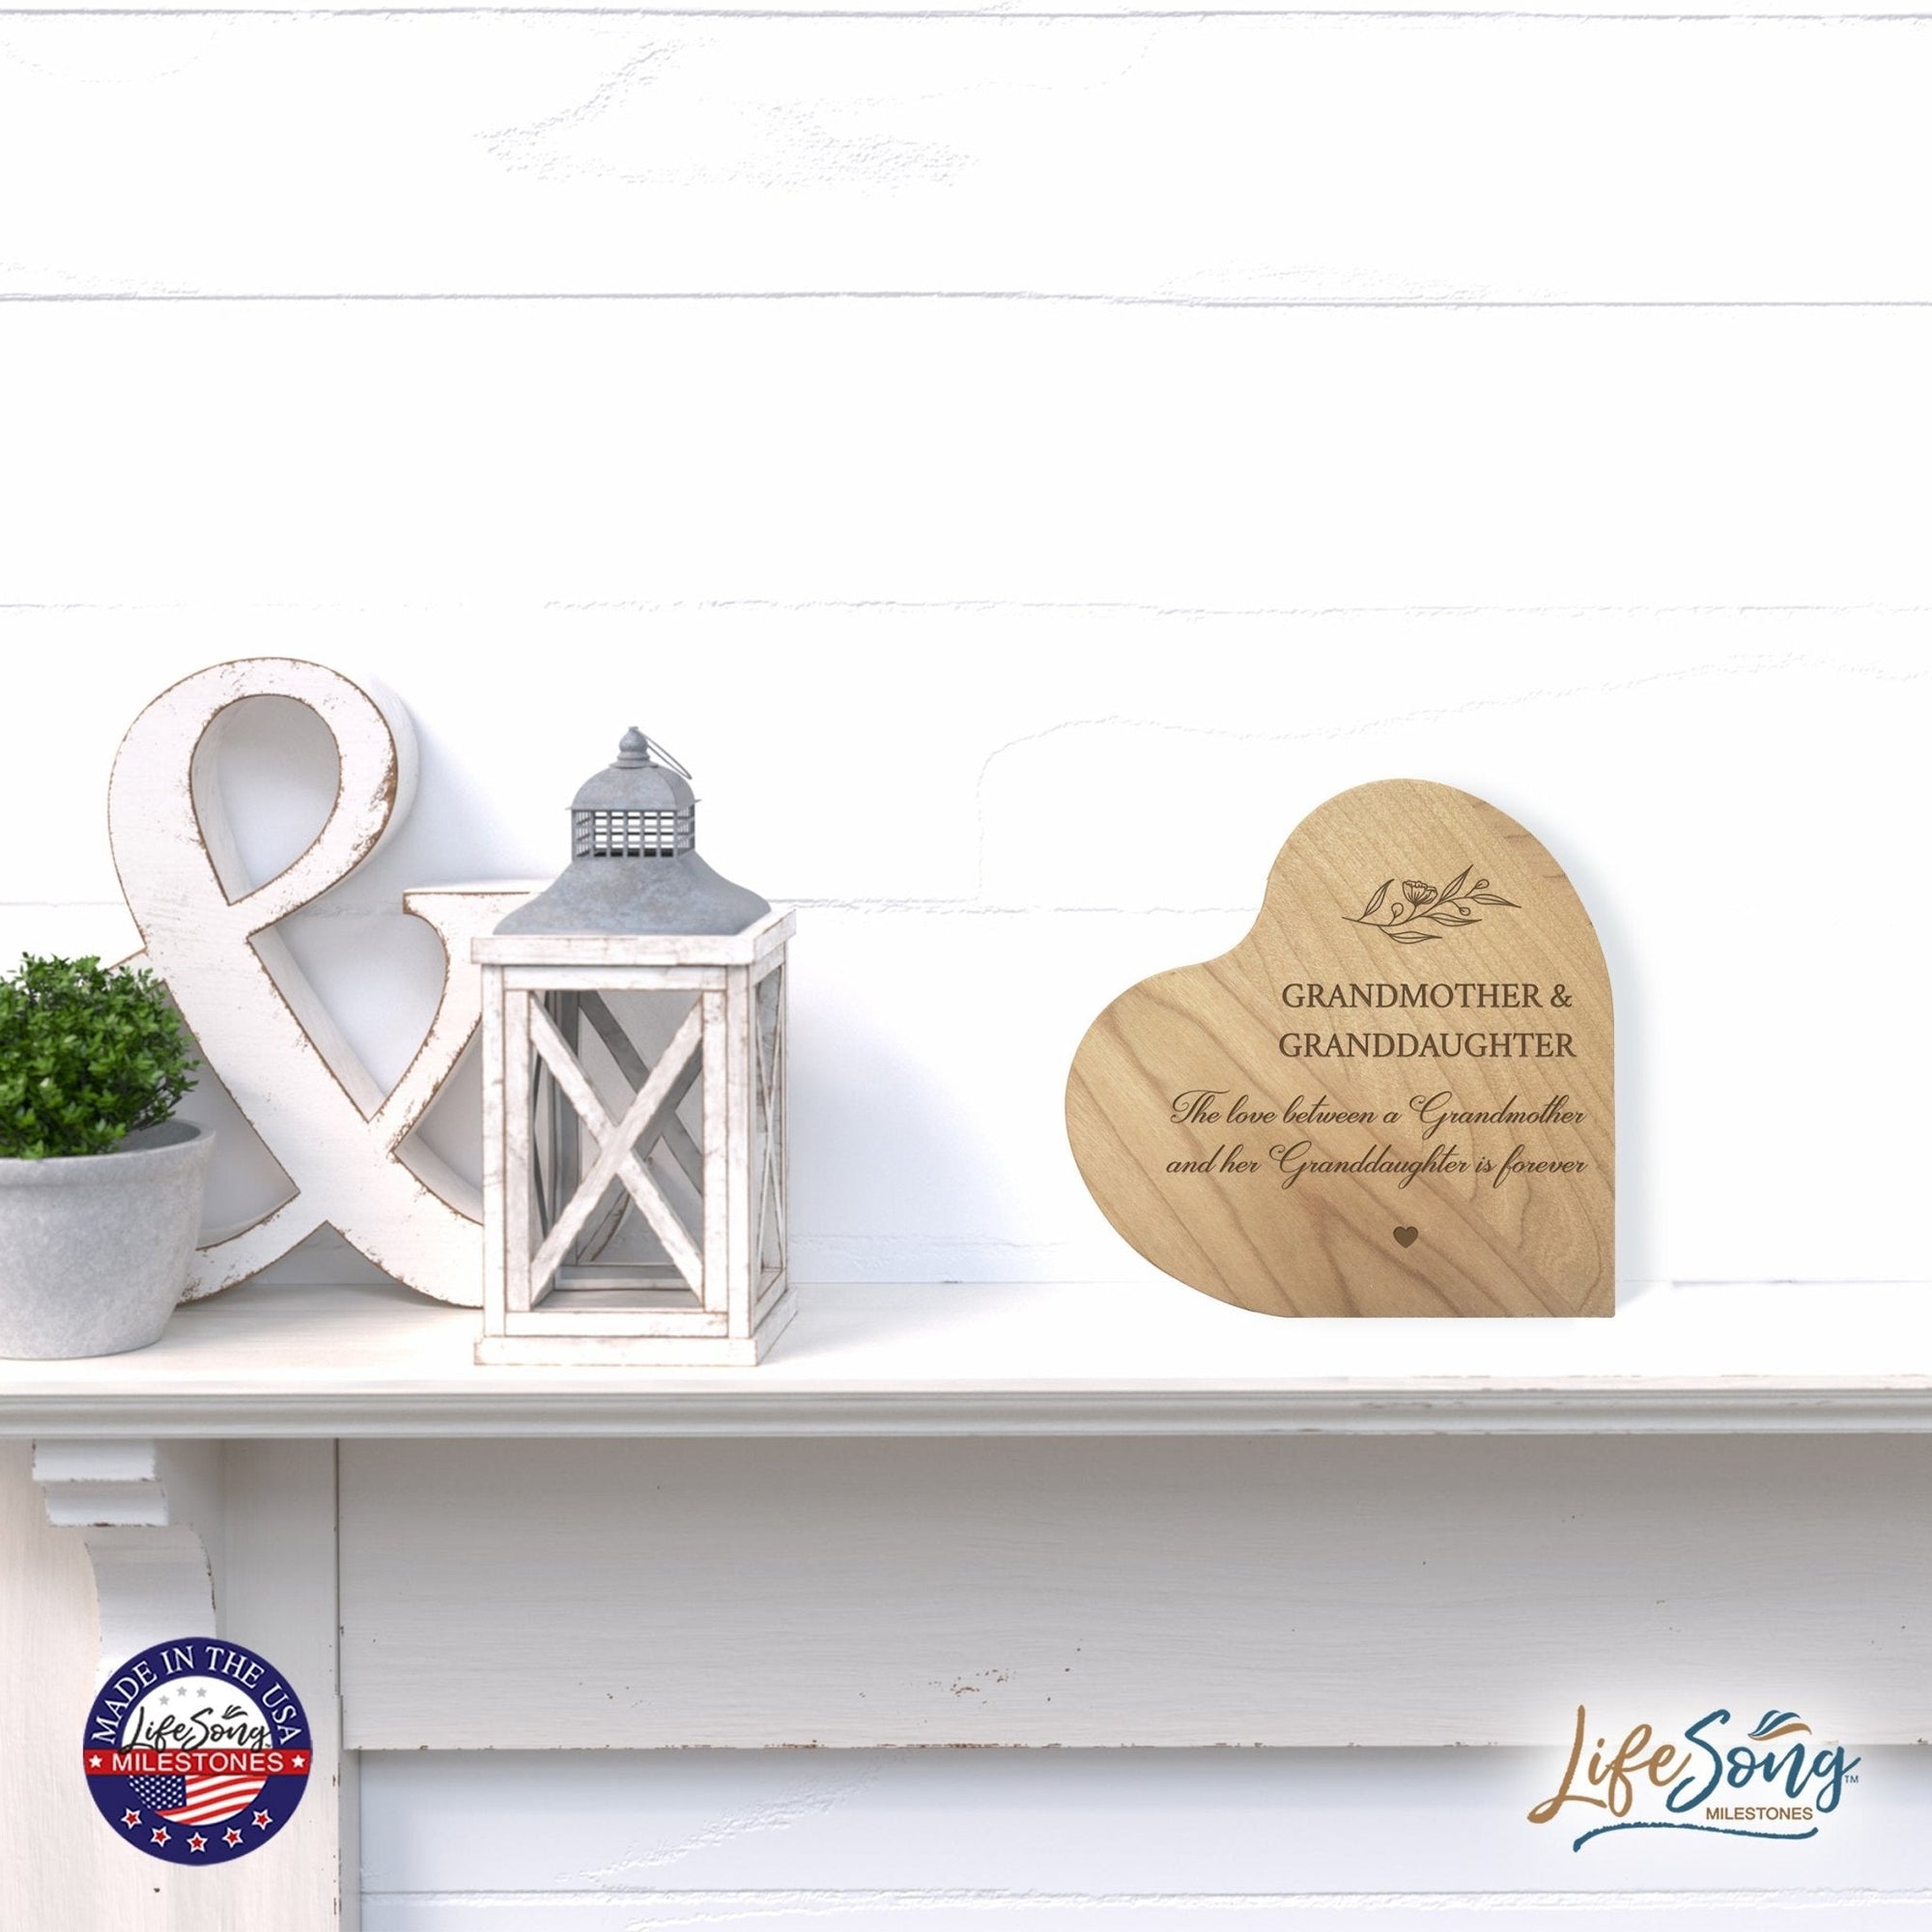 Modern Grandmother’s Love Solid Wood Heart Decoration With Inspirational Verse Keepsake Gift 5x5.25 - Grandmother & Granddaughter - LifeSong Milestones